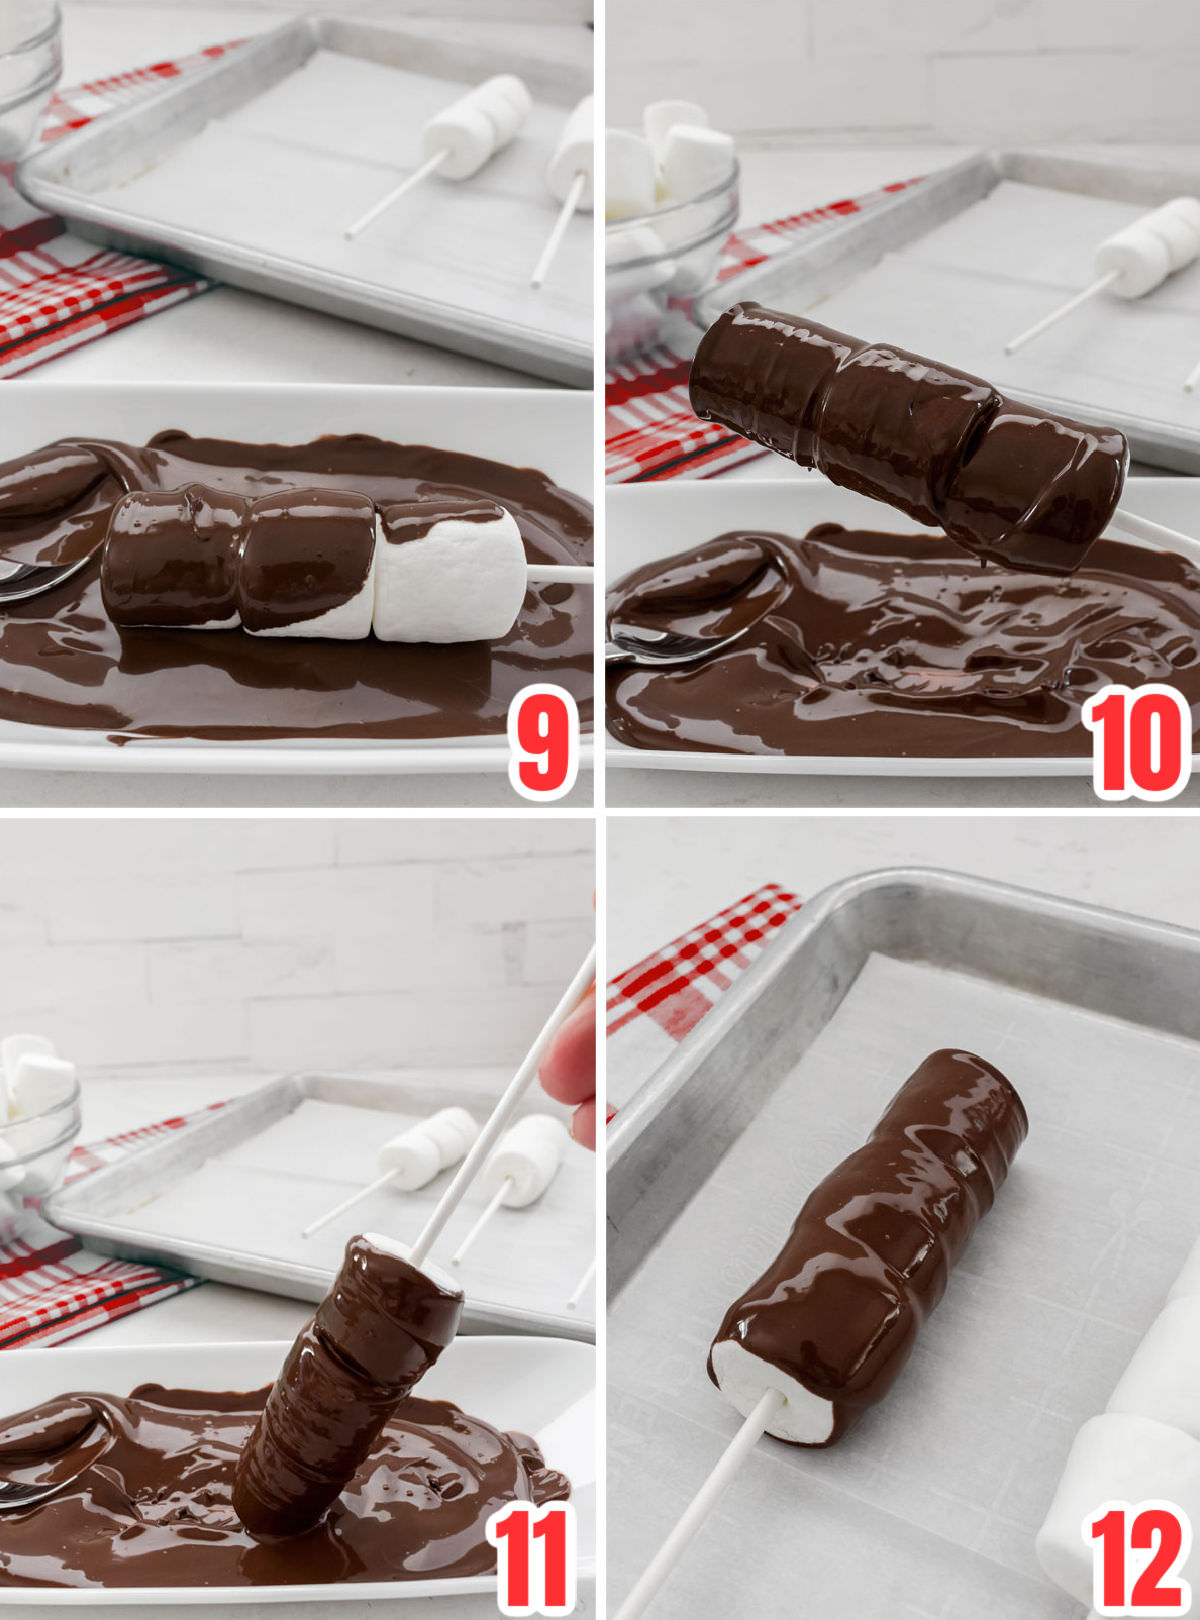 Collage image showing the steps for covering marshmallow pops with melted chocolate.